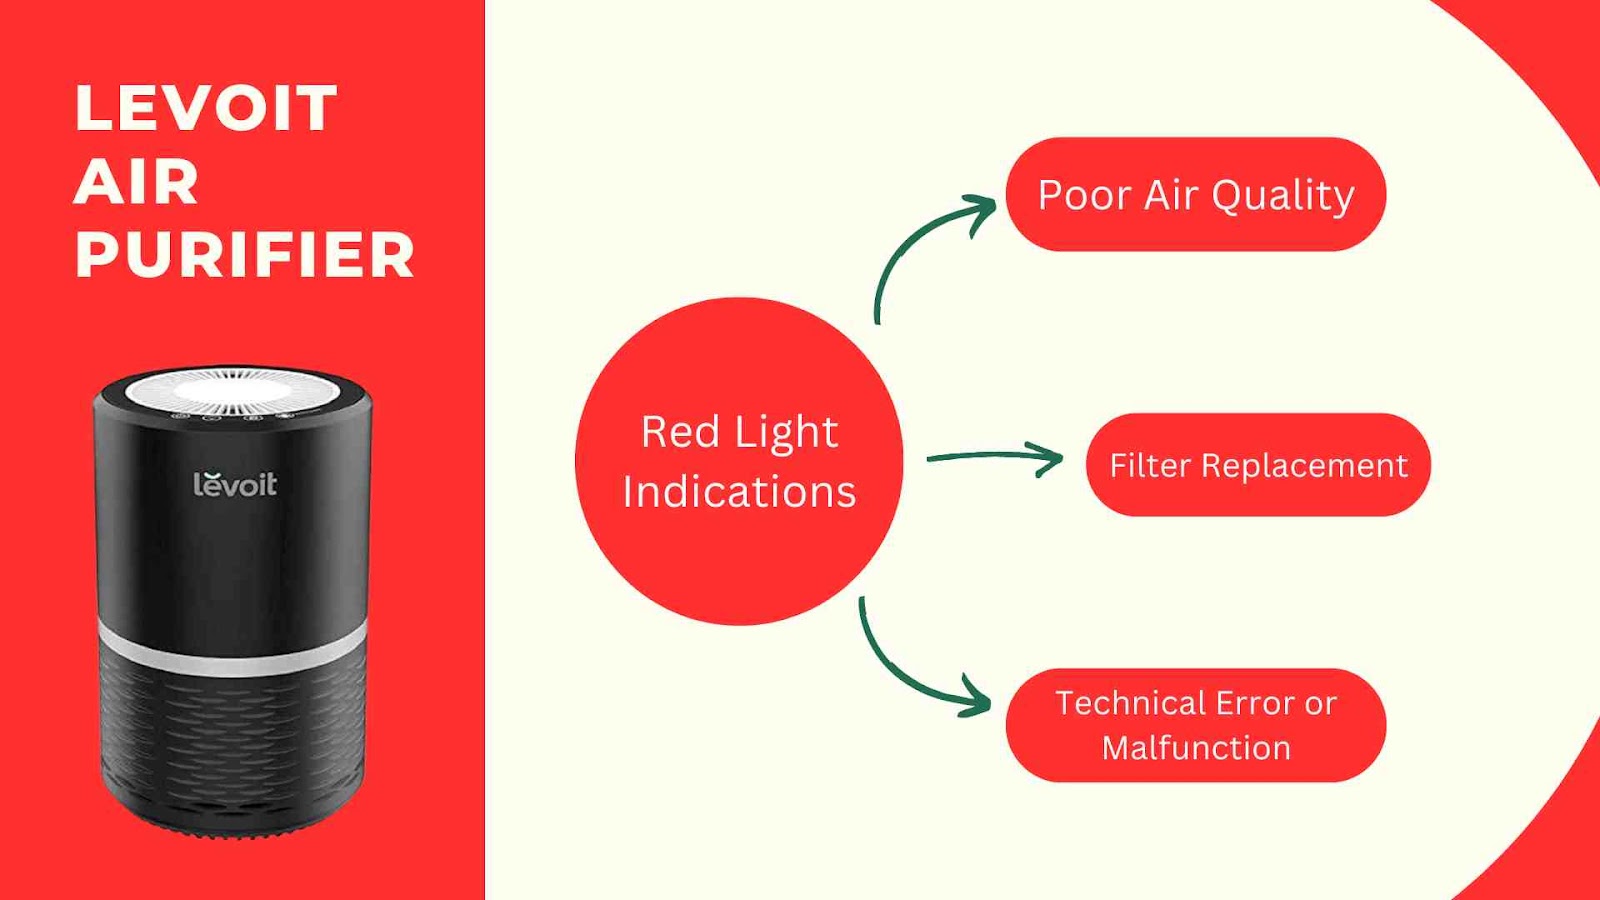 Why is the Levoit air purifier red light on?